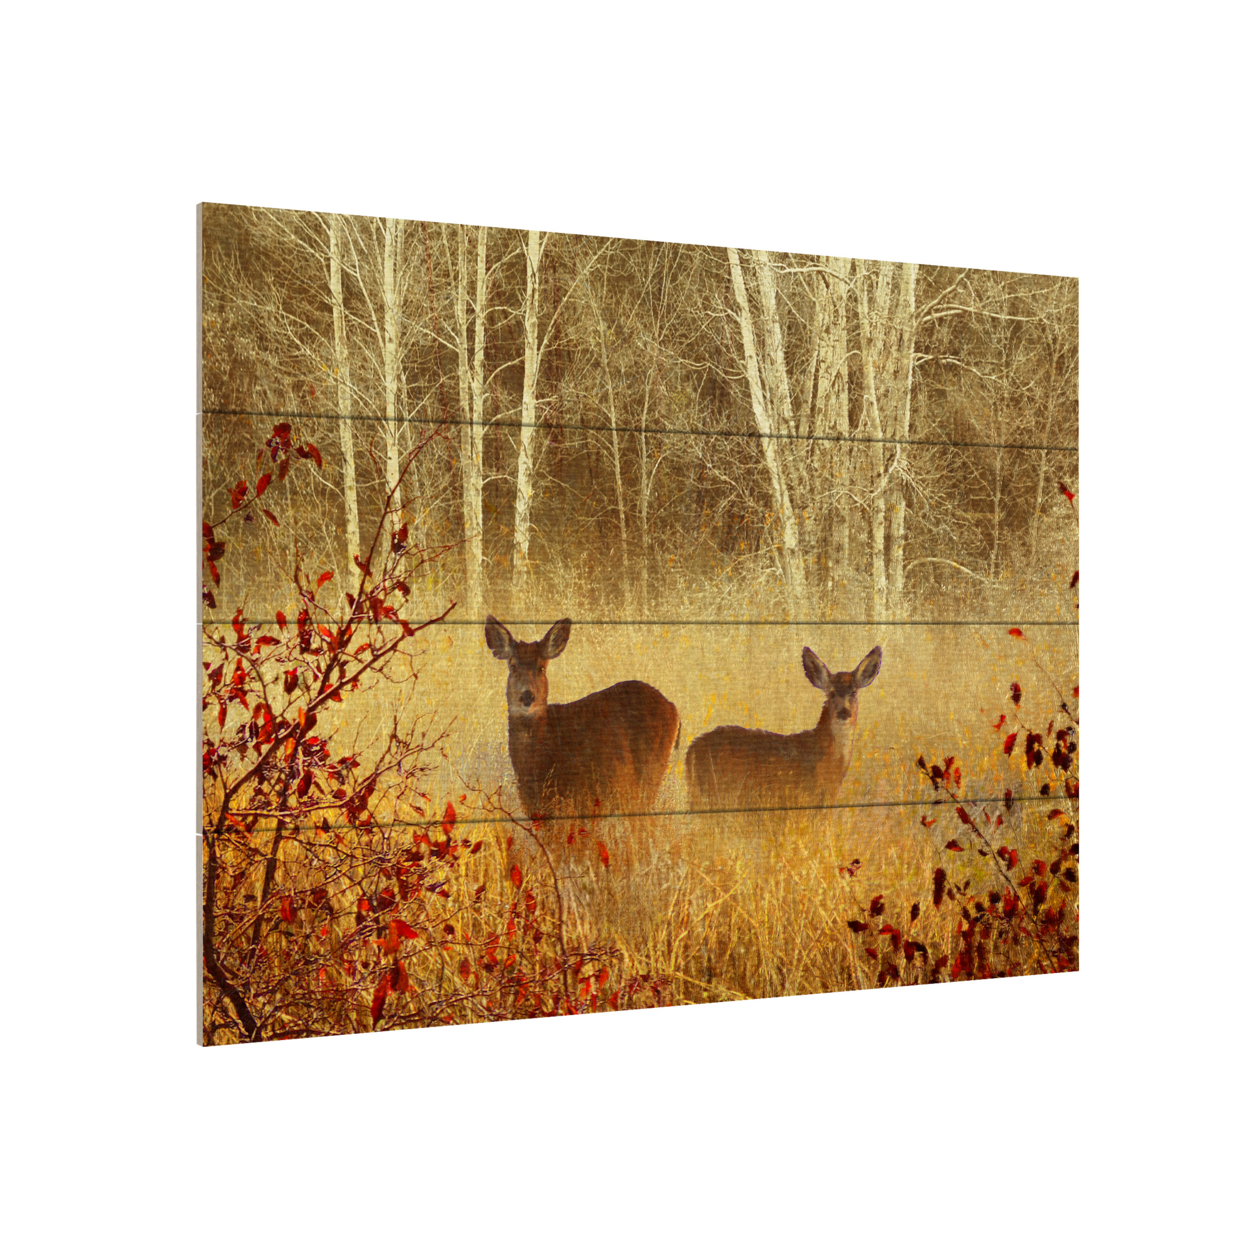 Wall Art 12 X 16 Inches Titled Foggy Deer Ready To Hang Printed On Wooden Planks